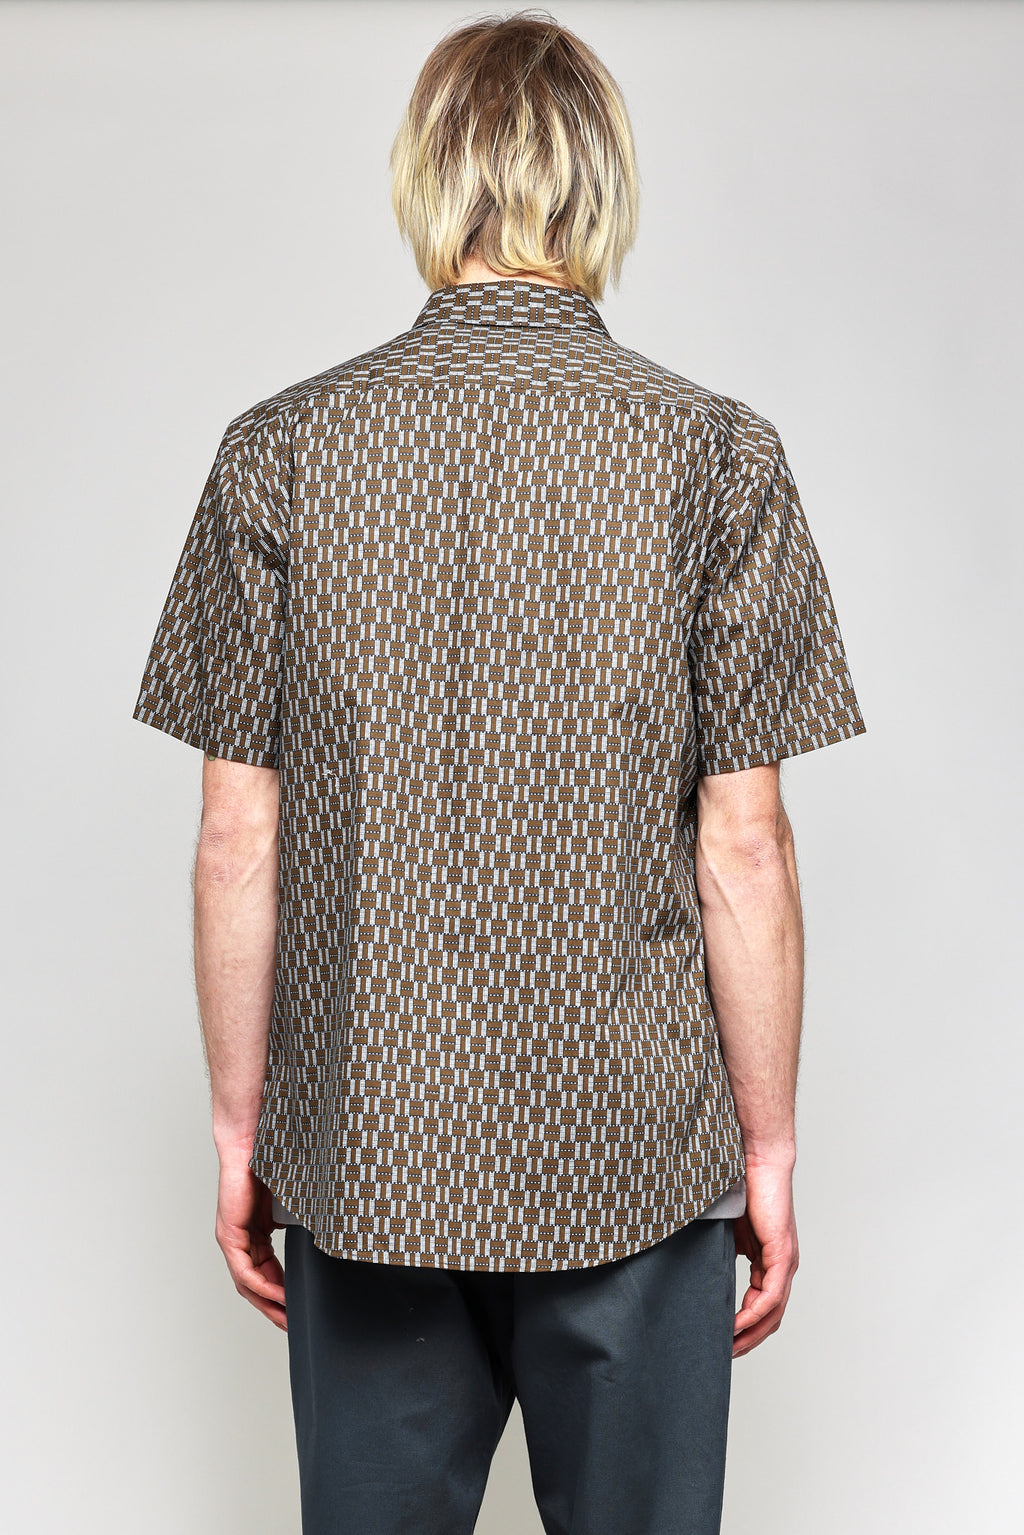 Japanese Graphic Grid Print in Khaki and Blue 03